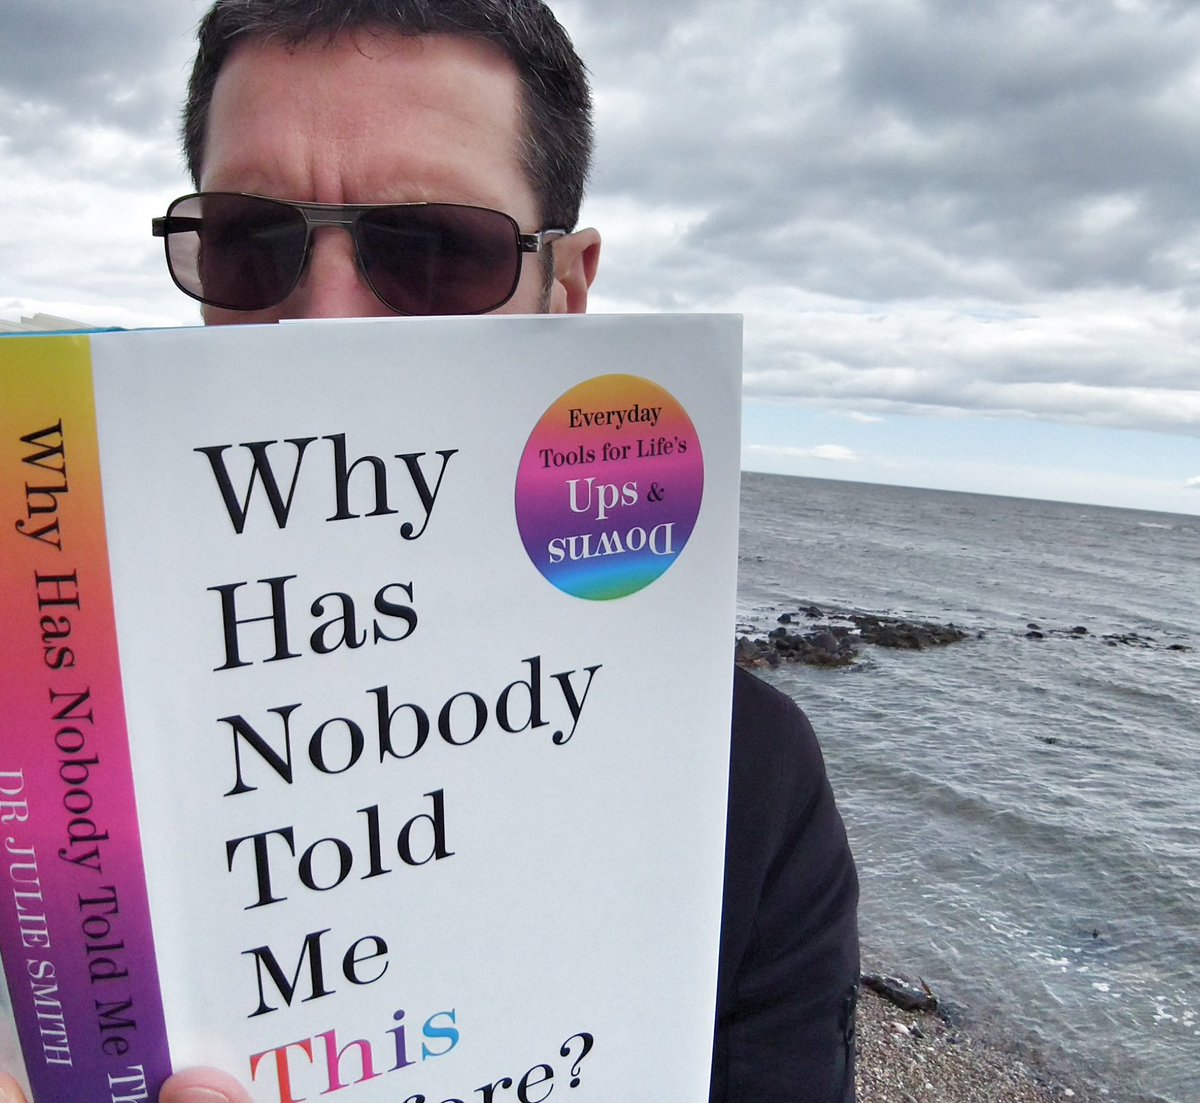 Supercharge your mental health by reading for just 6 minutes with the #KeepTheHeid & #Read campaign from @SLIC1991.

As it's also #MHAW22, why not try the bestselling 'Why Has Nobody Told Me This Before?' by @Dr_Julie_Smith 💙 

#MentalHealthMatters
#LibrariesAreEssential